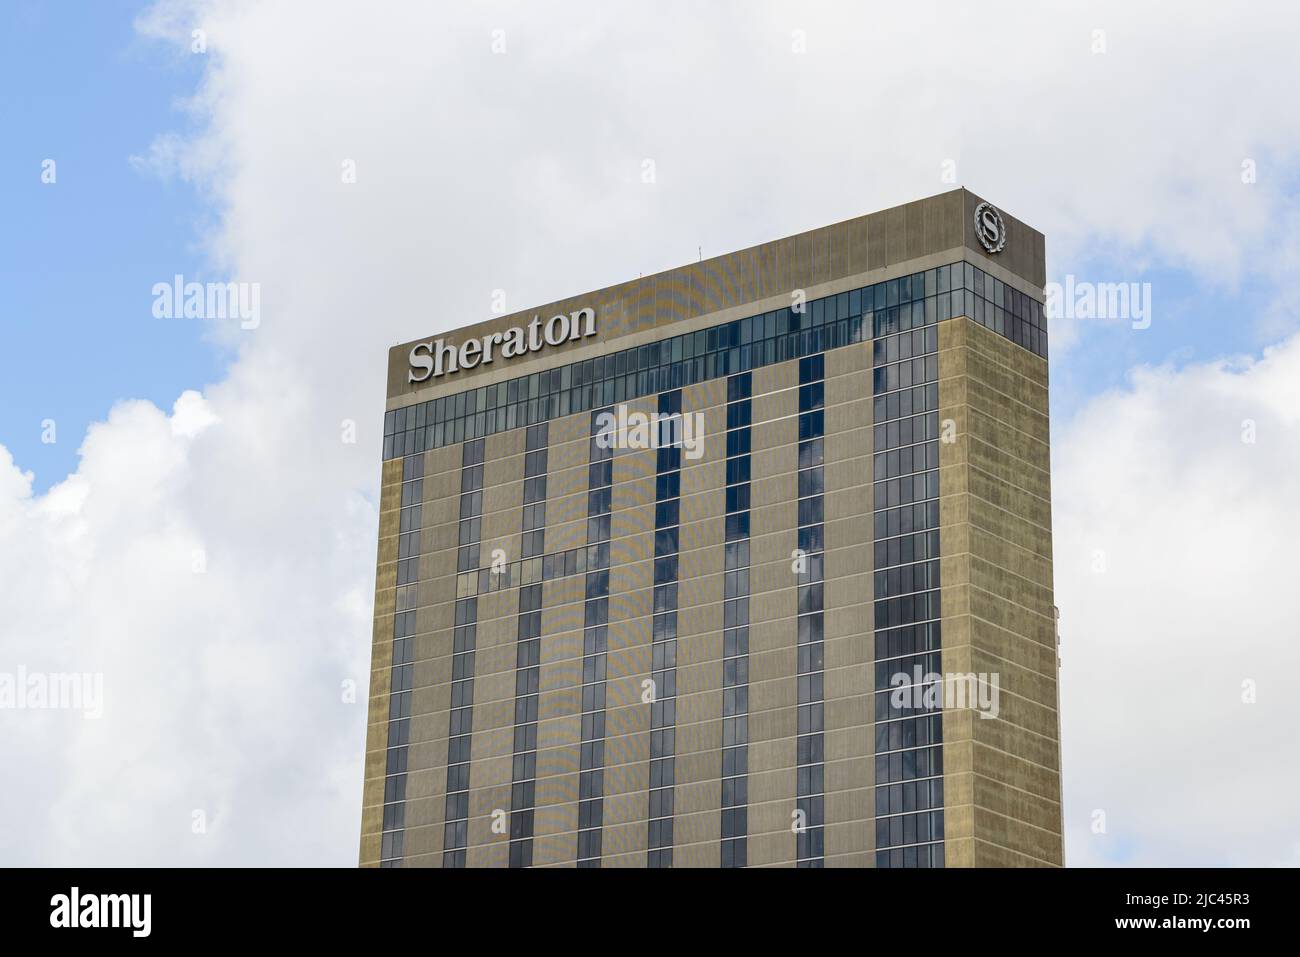 NEW ORLEANS, LA, USA - APRIL 24, 2022: Sheraton Hotel sign and logo on the side of the building in downtown New Orleans Stock Photo